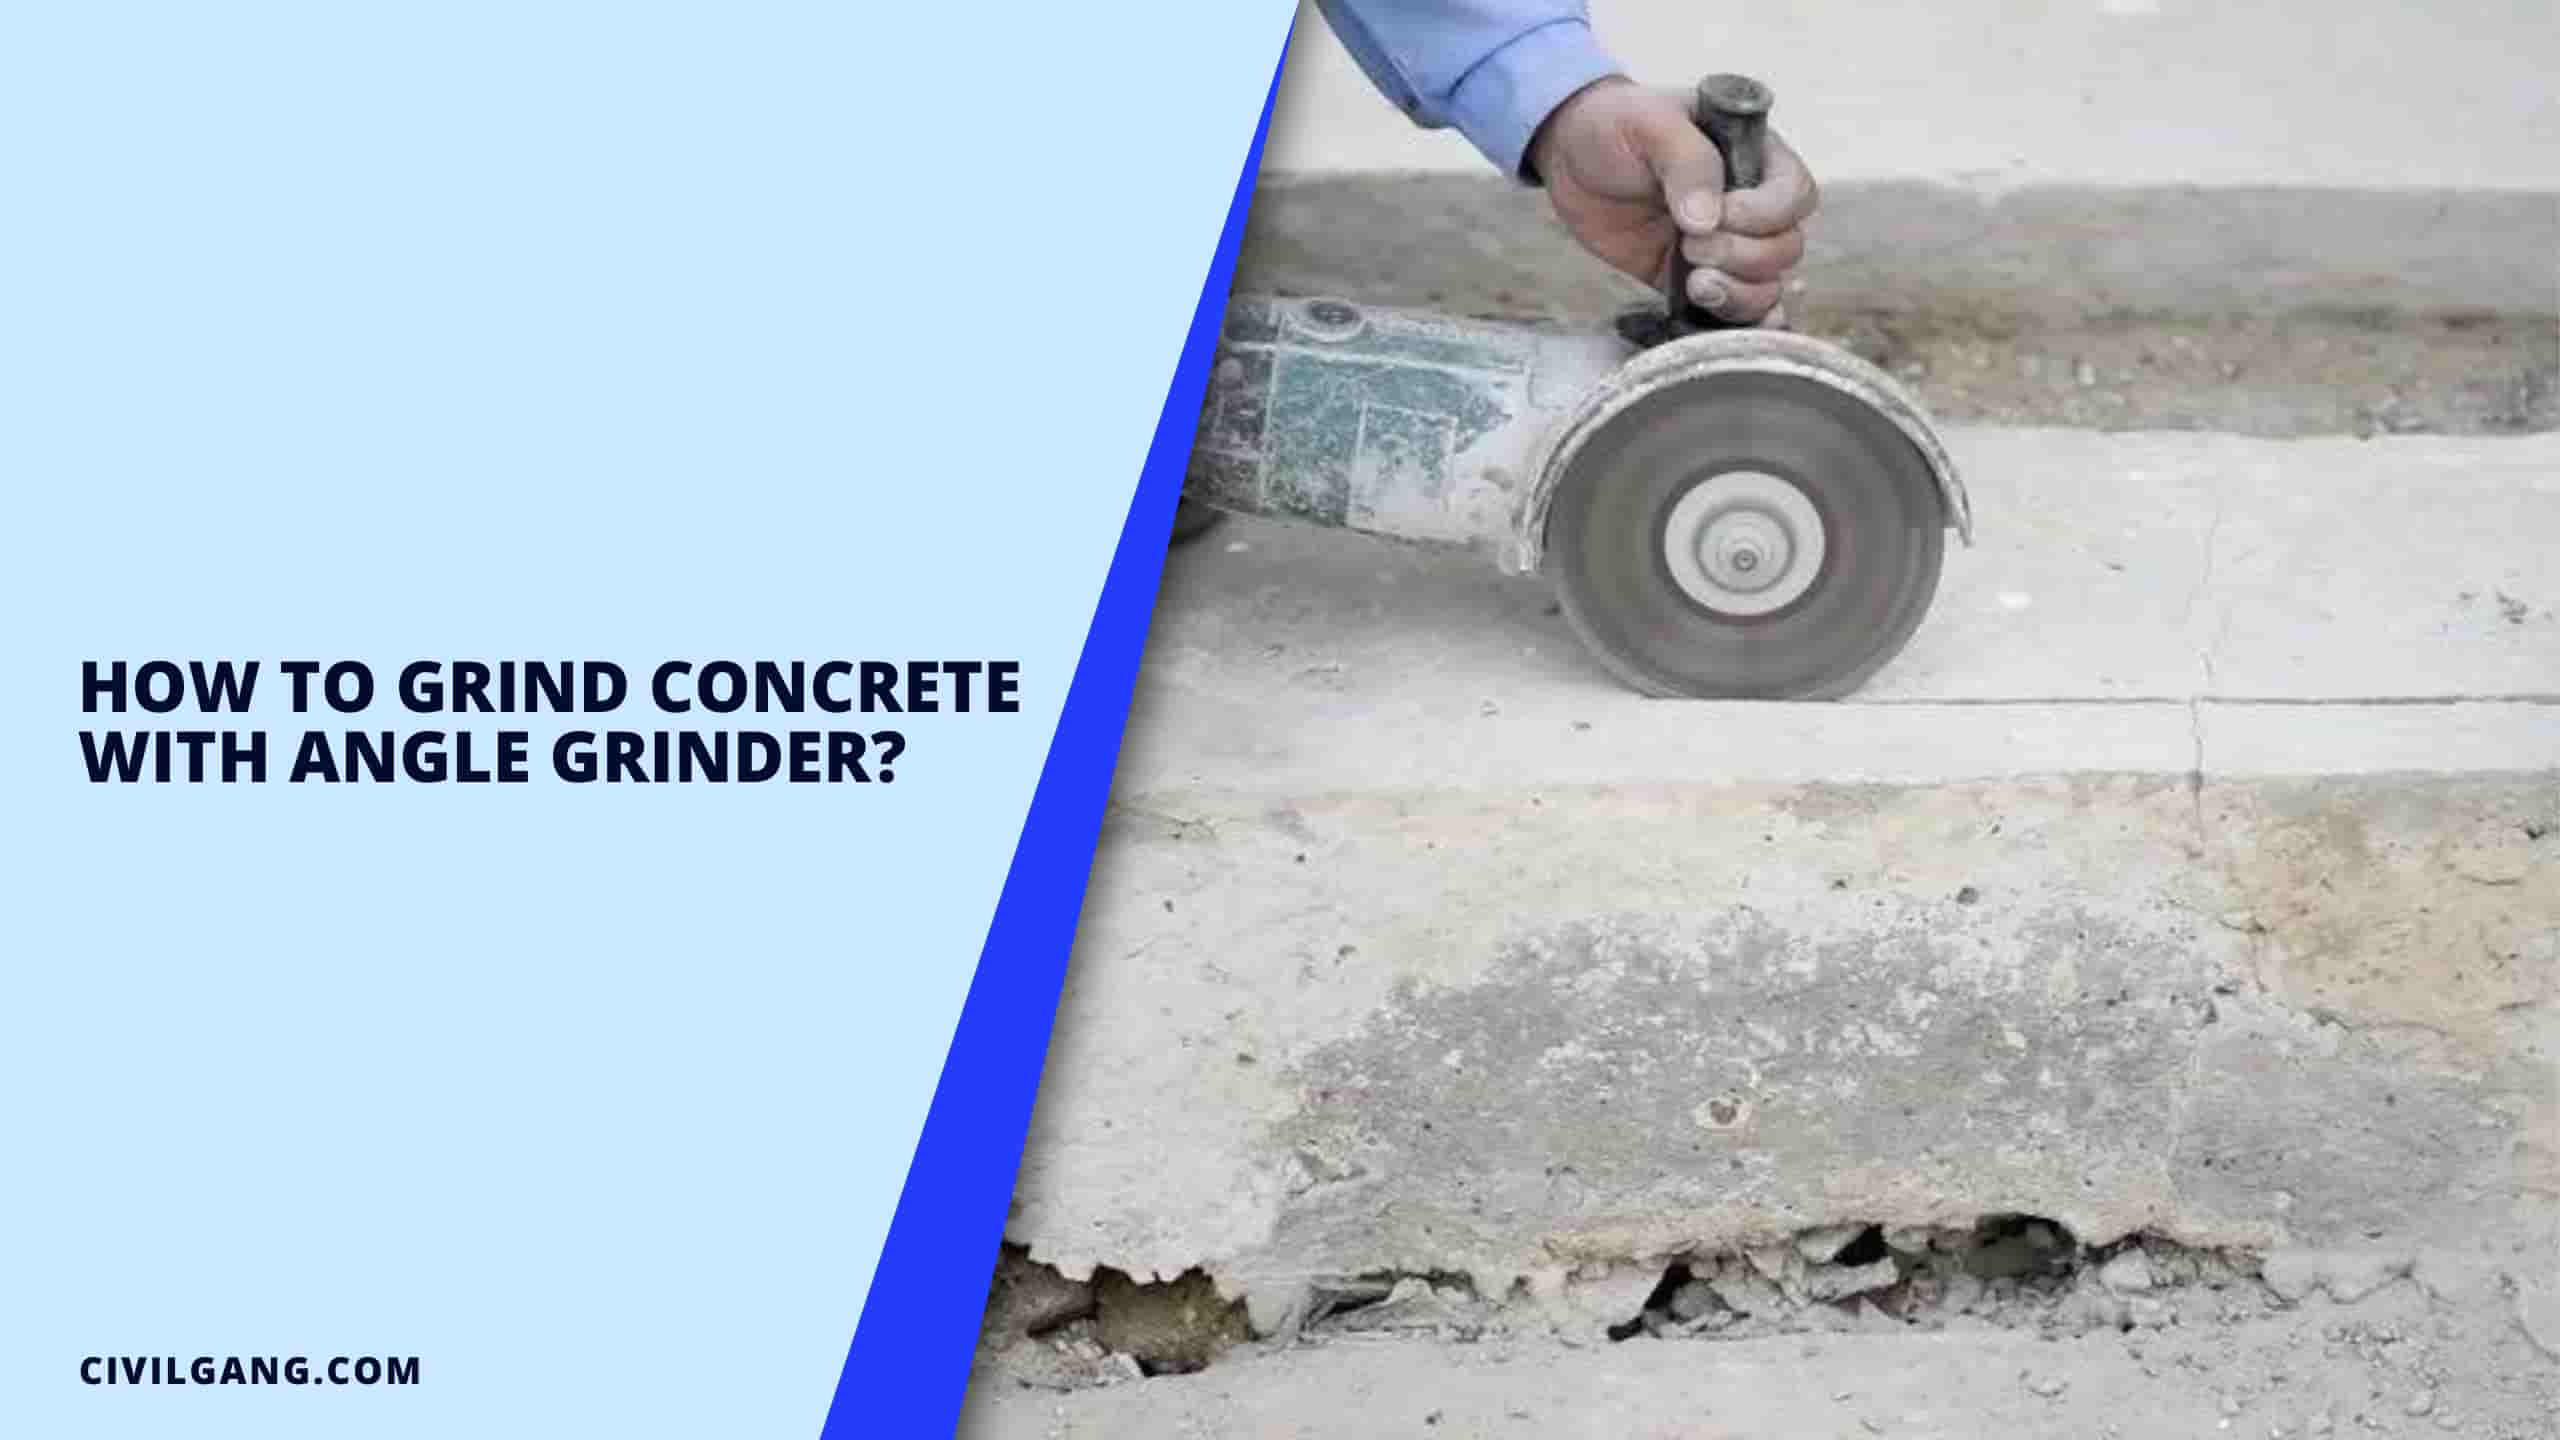 How to Grind Concrete With Angle Grinder?